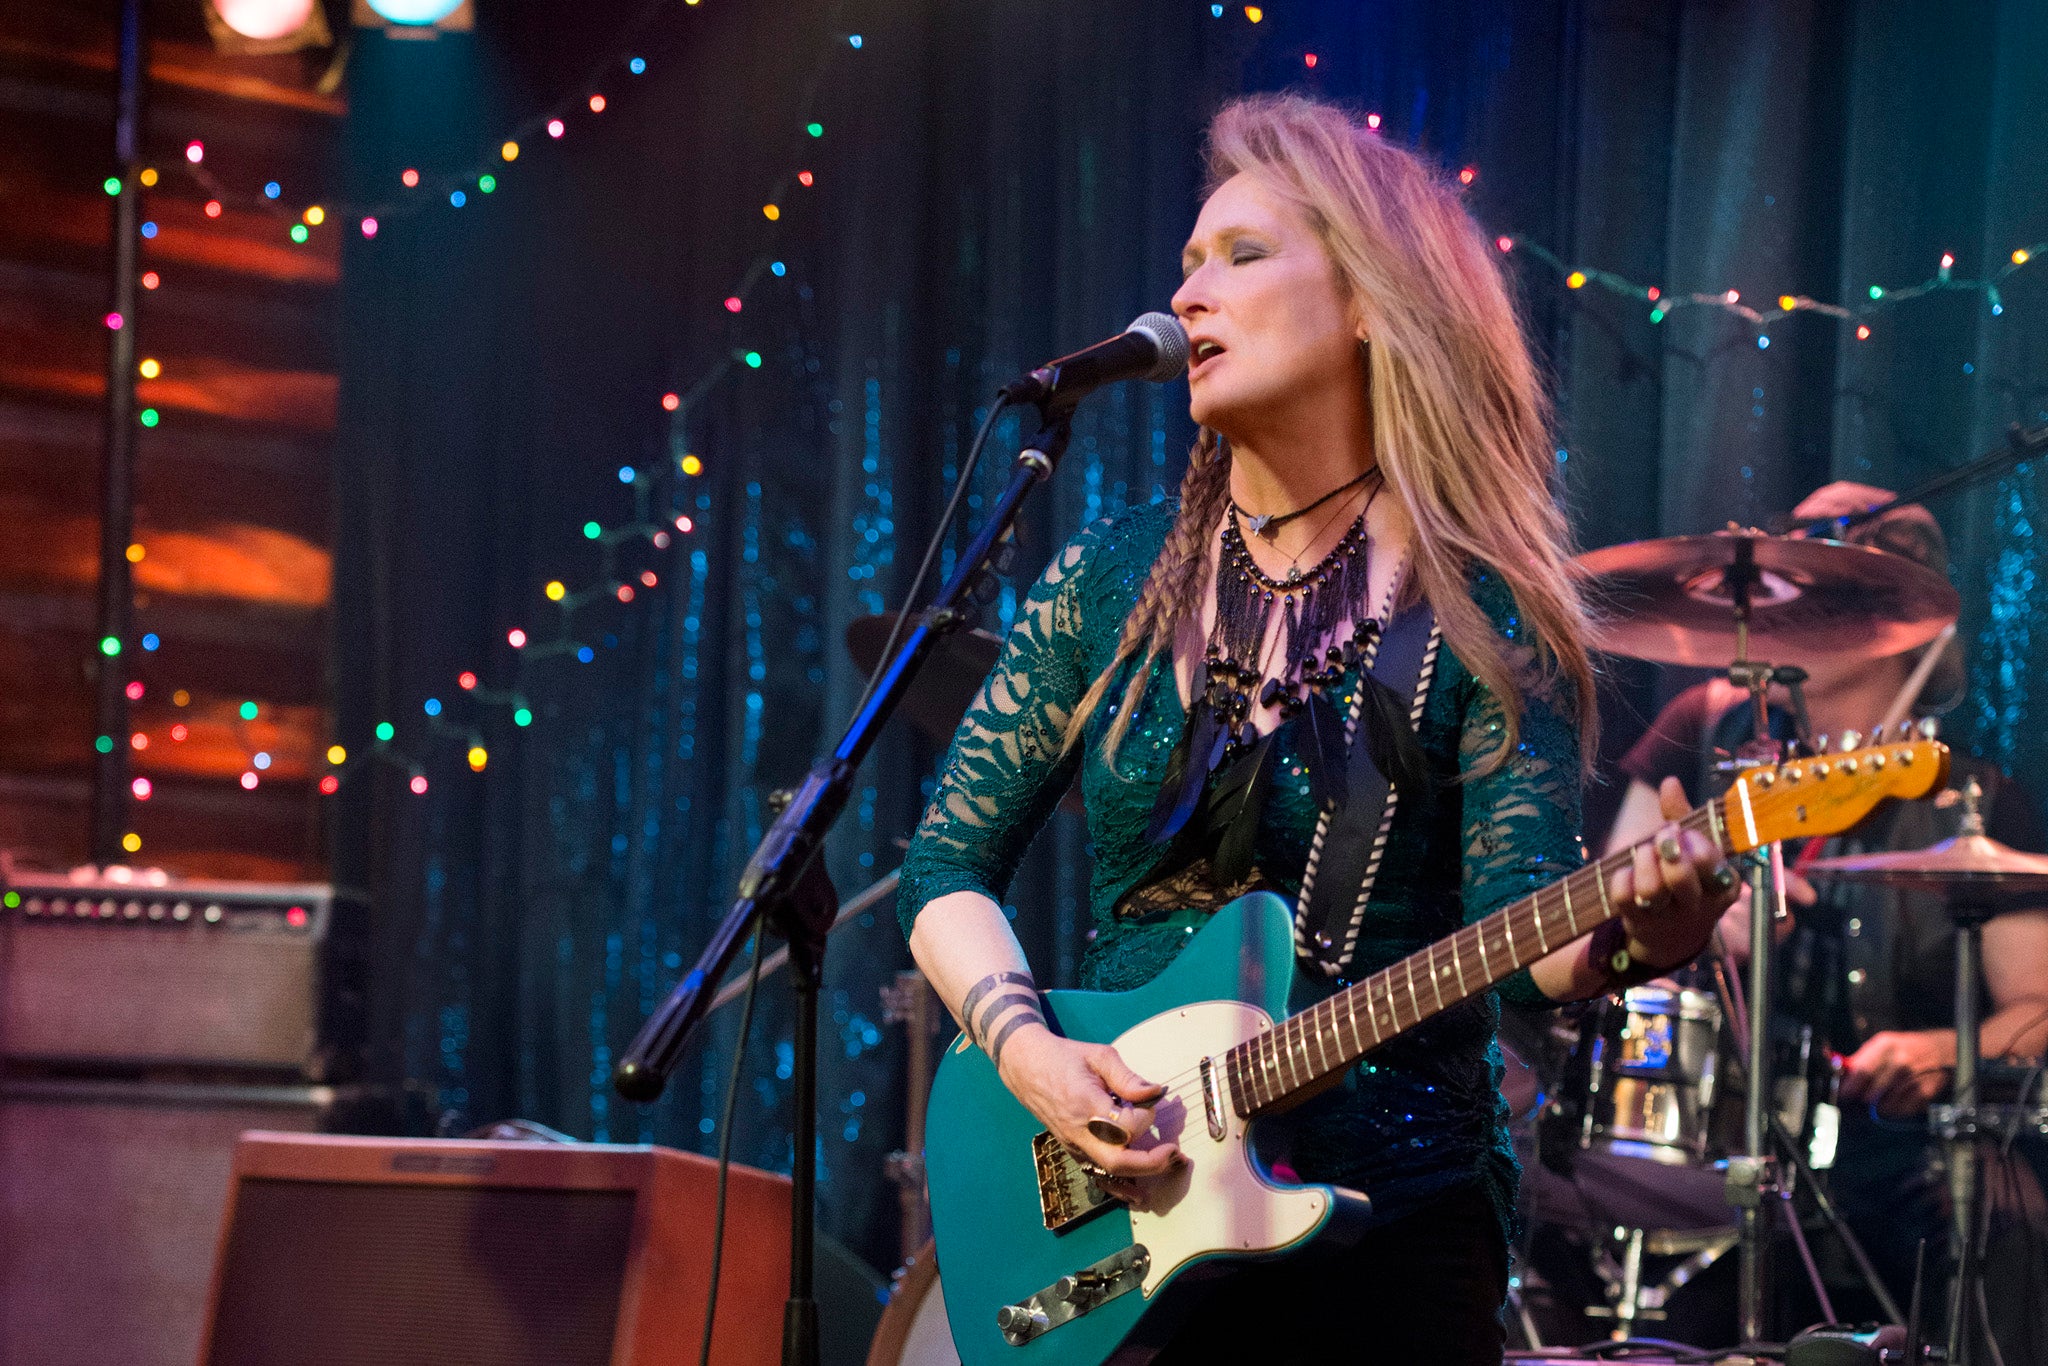 Meryl Streep rocks out in Ricki and the Flash